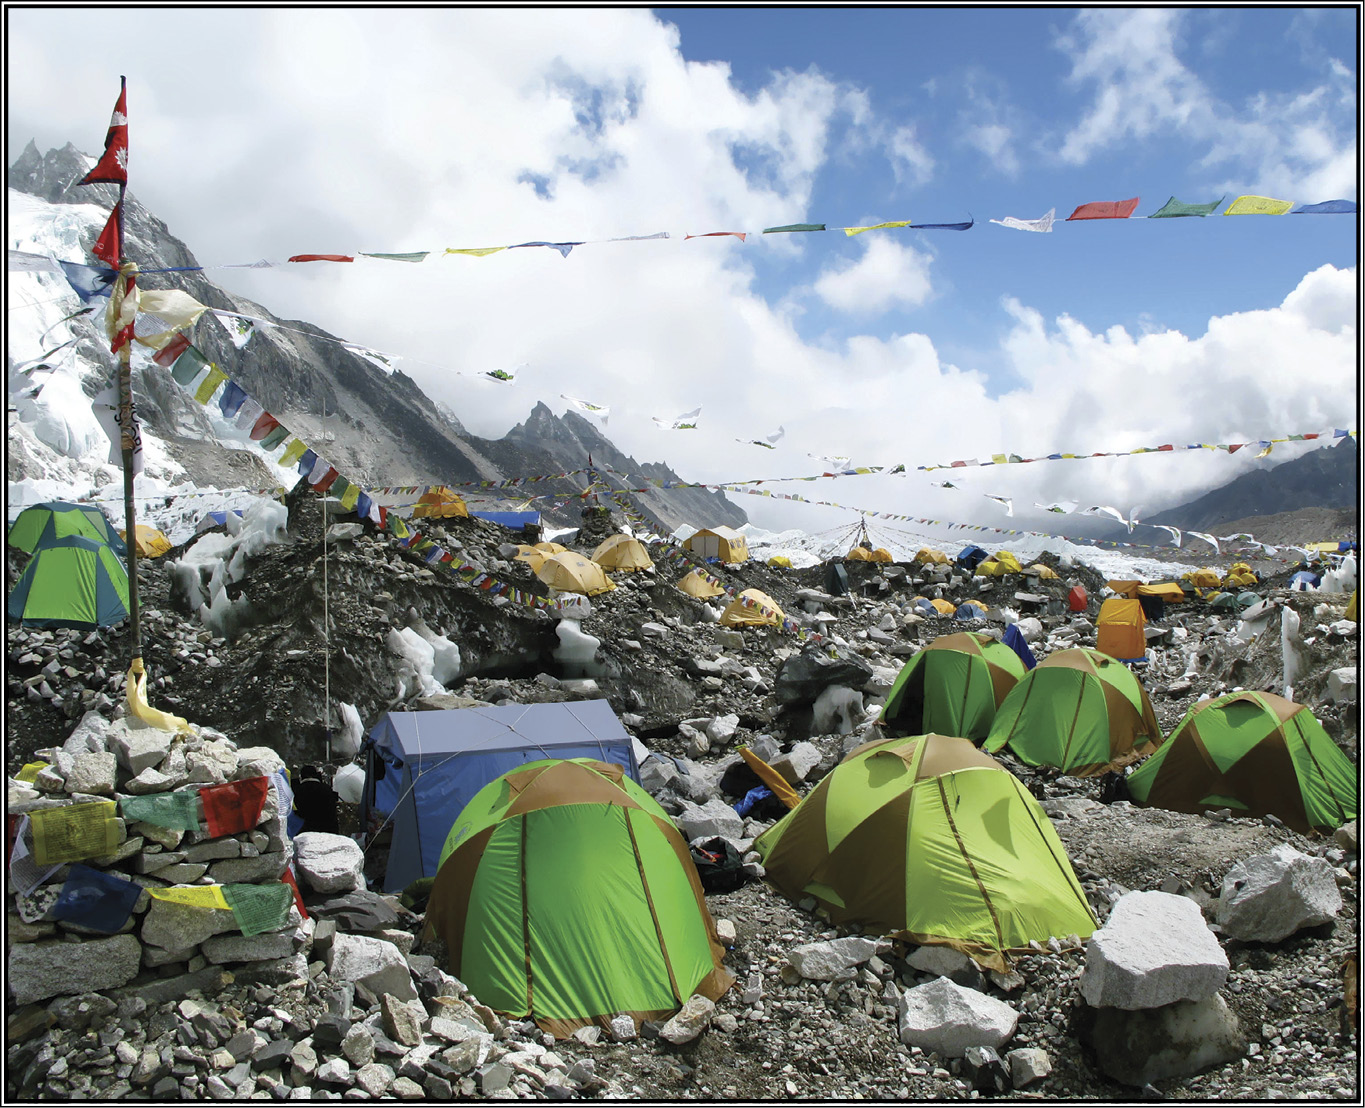 Thinkstock photographed by rmnunes Everest Base Camp For Aunt DianeNM For Rose - photo 5